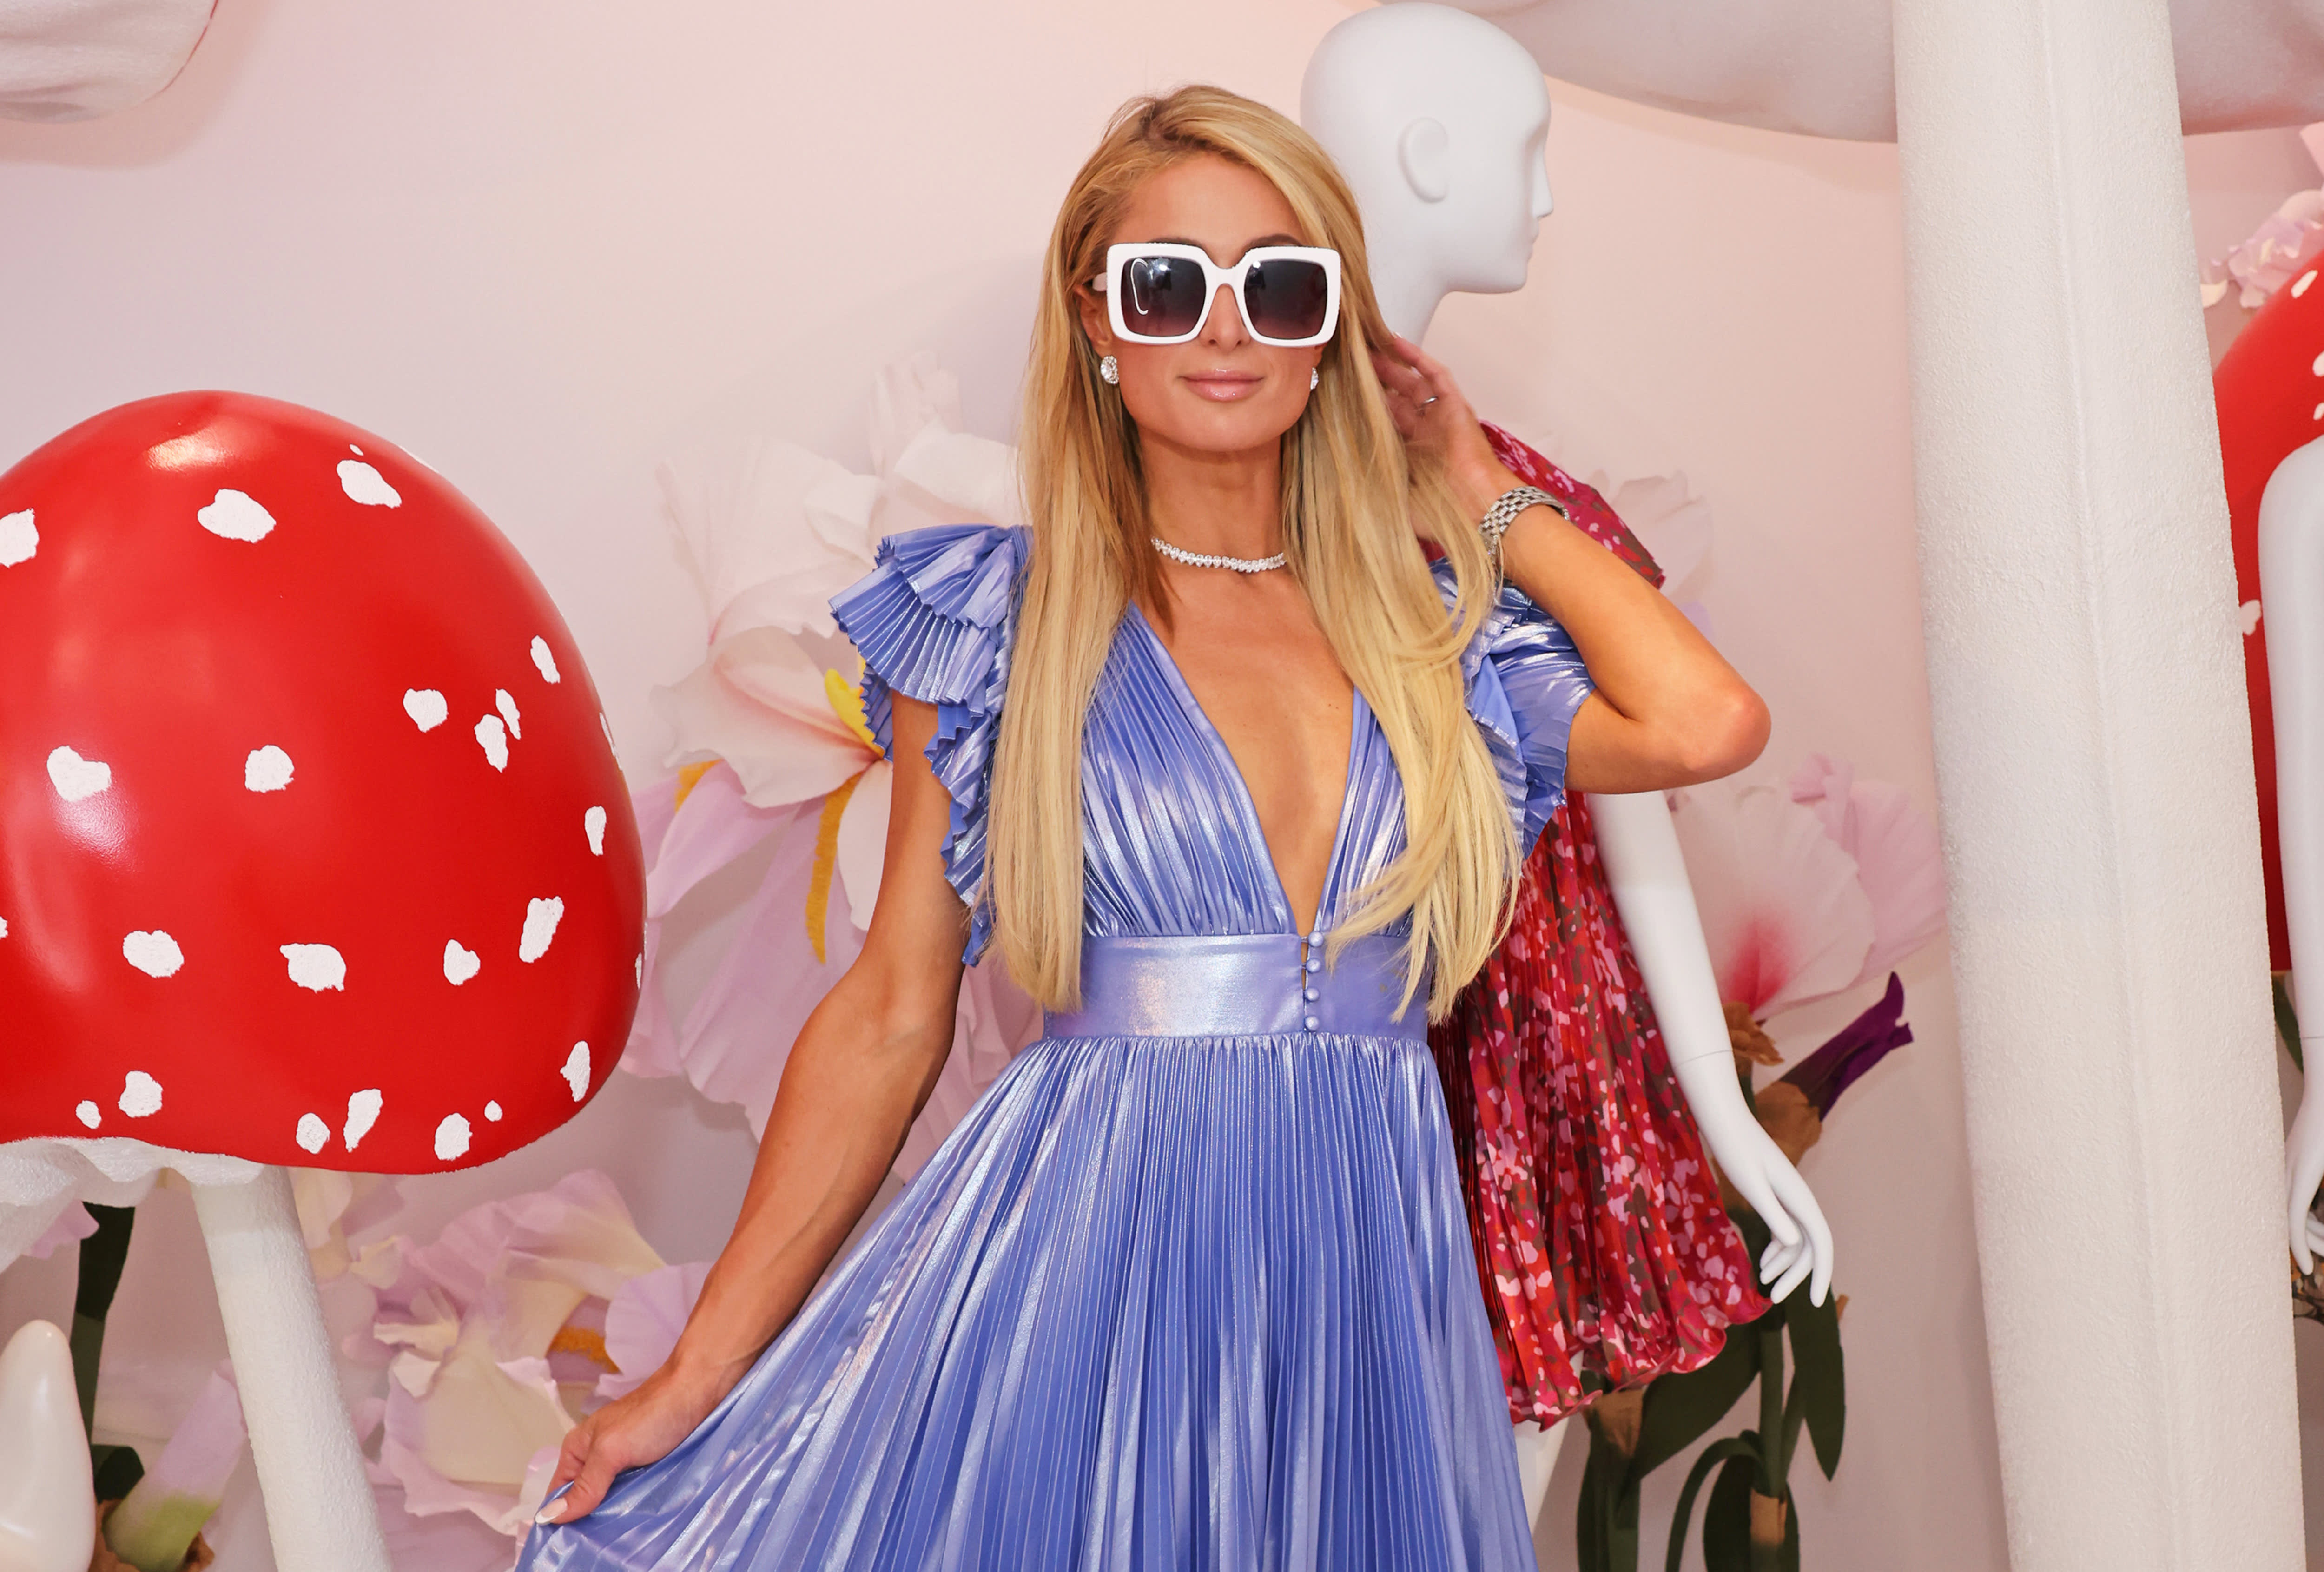 Paris Hilton Will Sell NFTs and Hold Virtual Parties in The Sandbox
Metaverse Platform